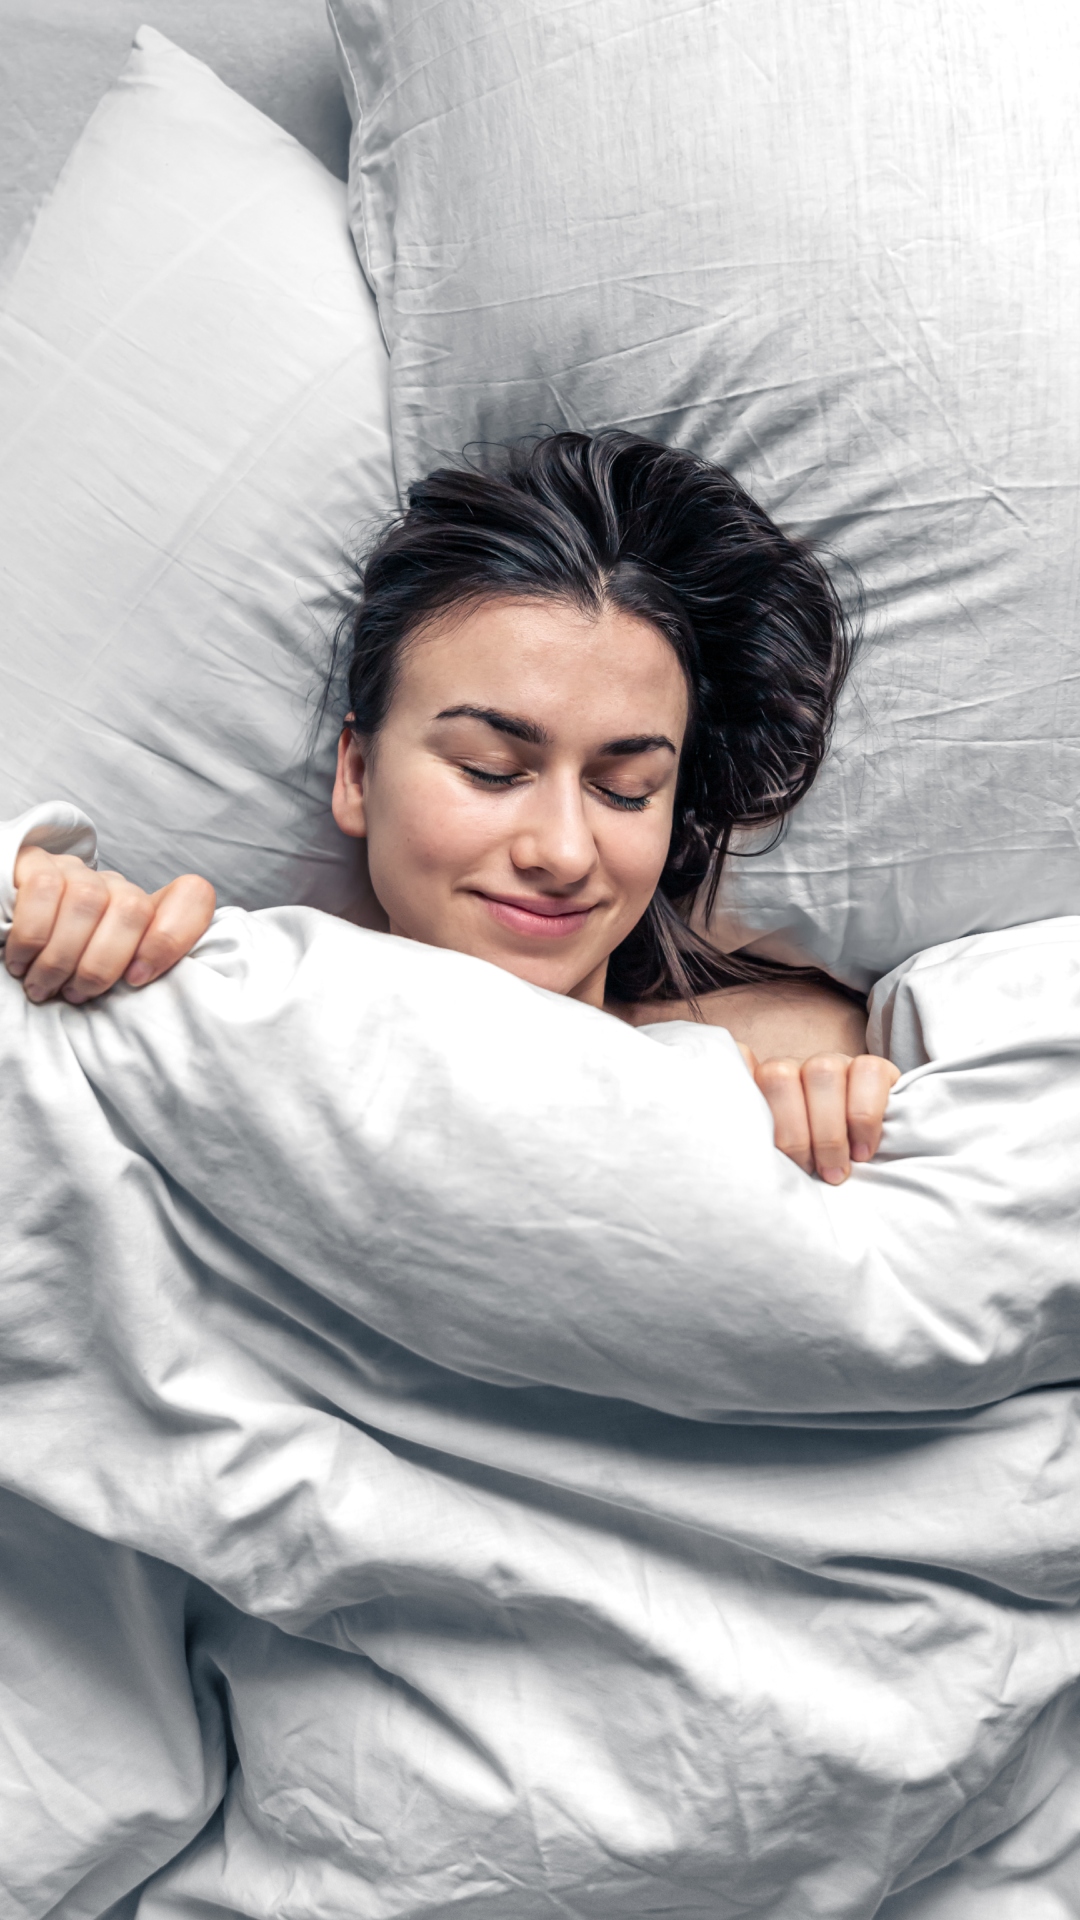 5 essential habits for a healthy bedtime routine for adults